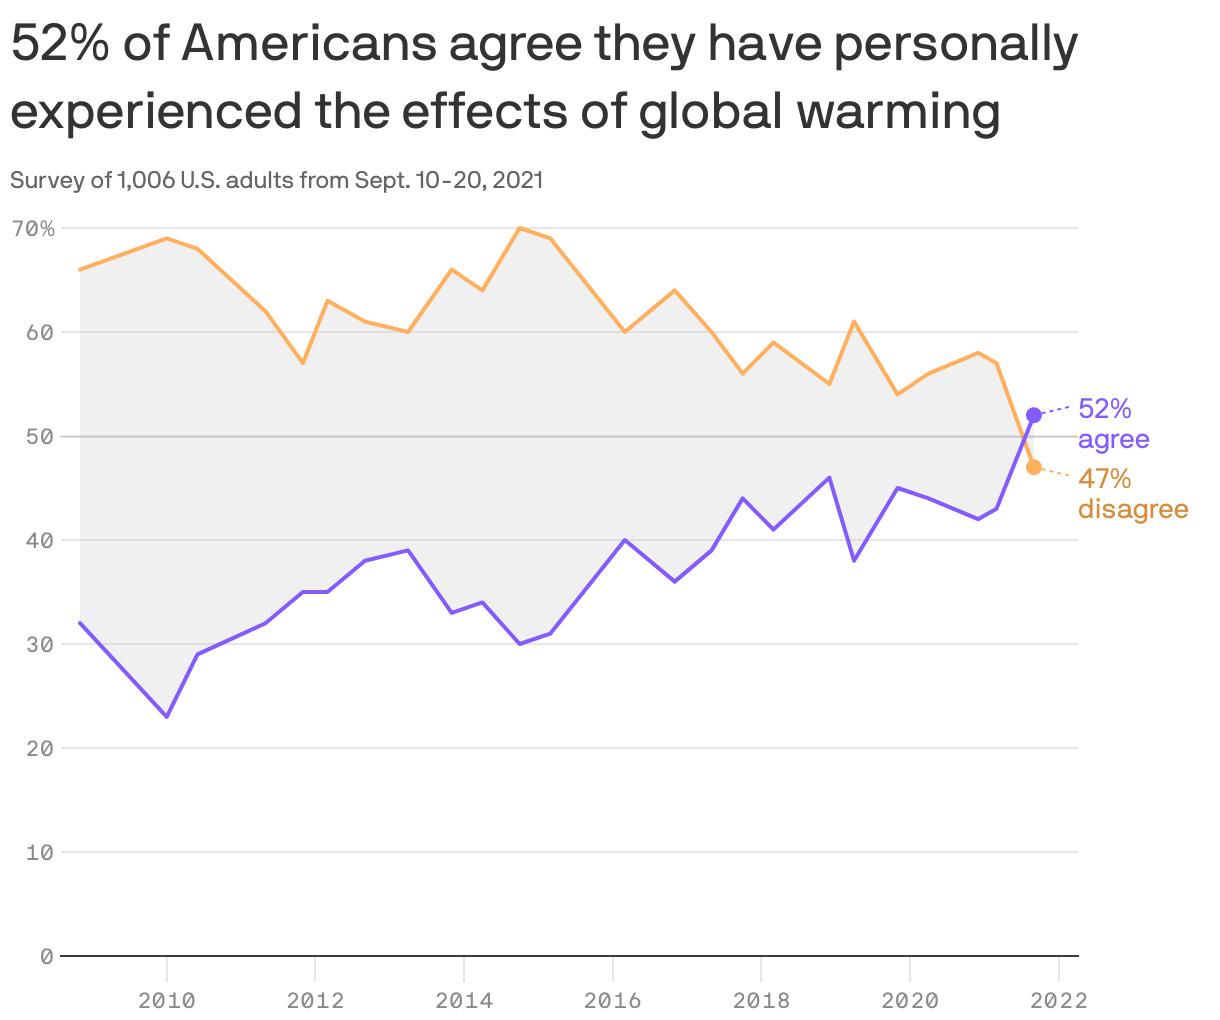 52% of Americans agree they have personally experienced the effects of global warming